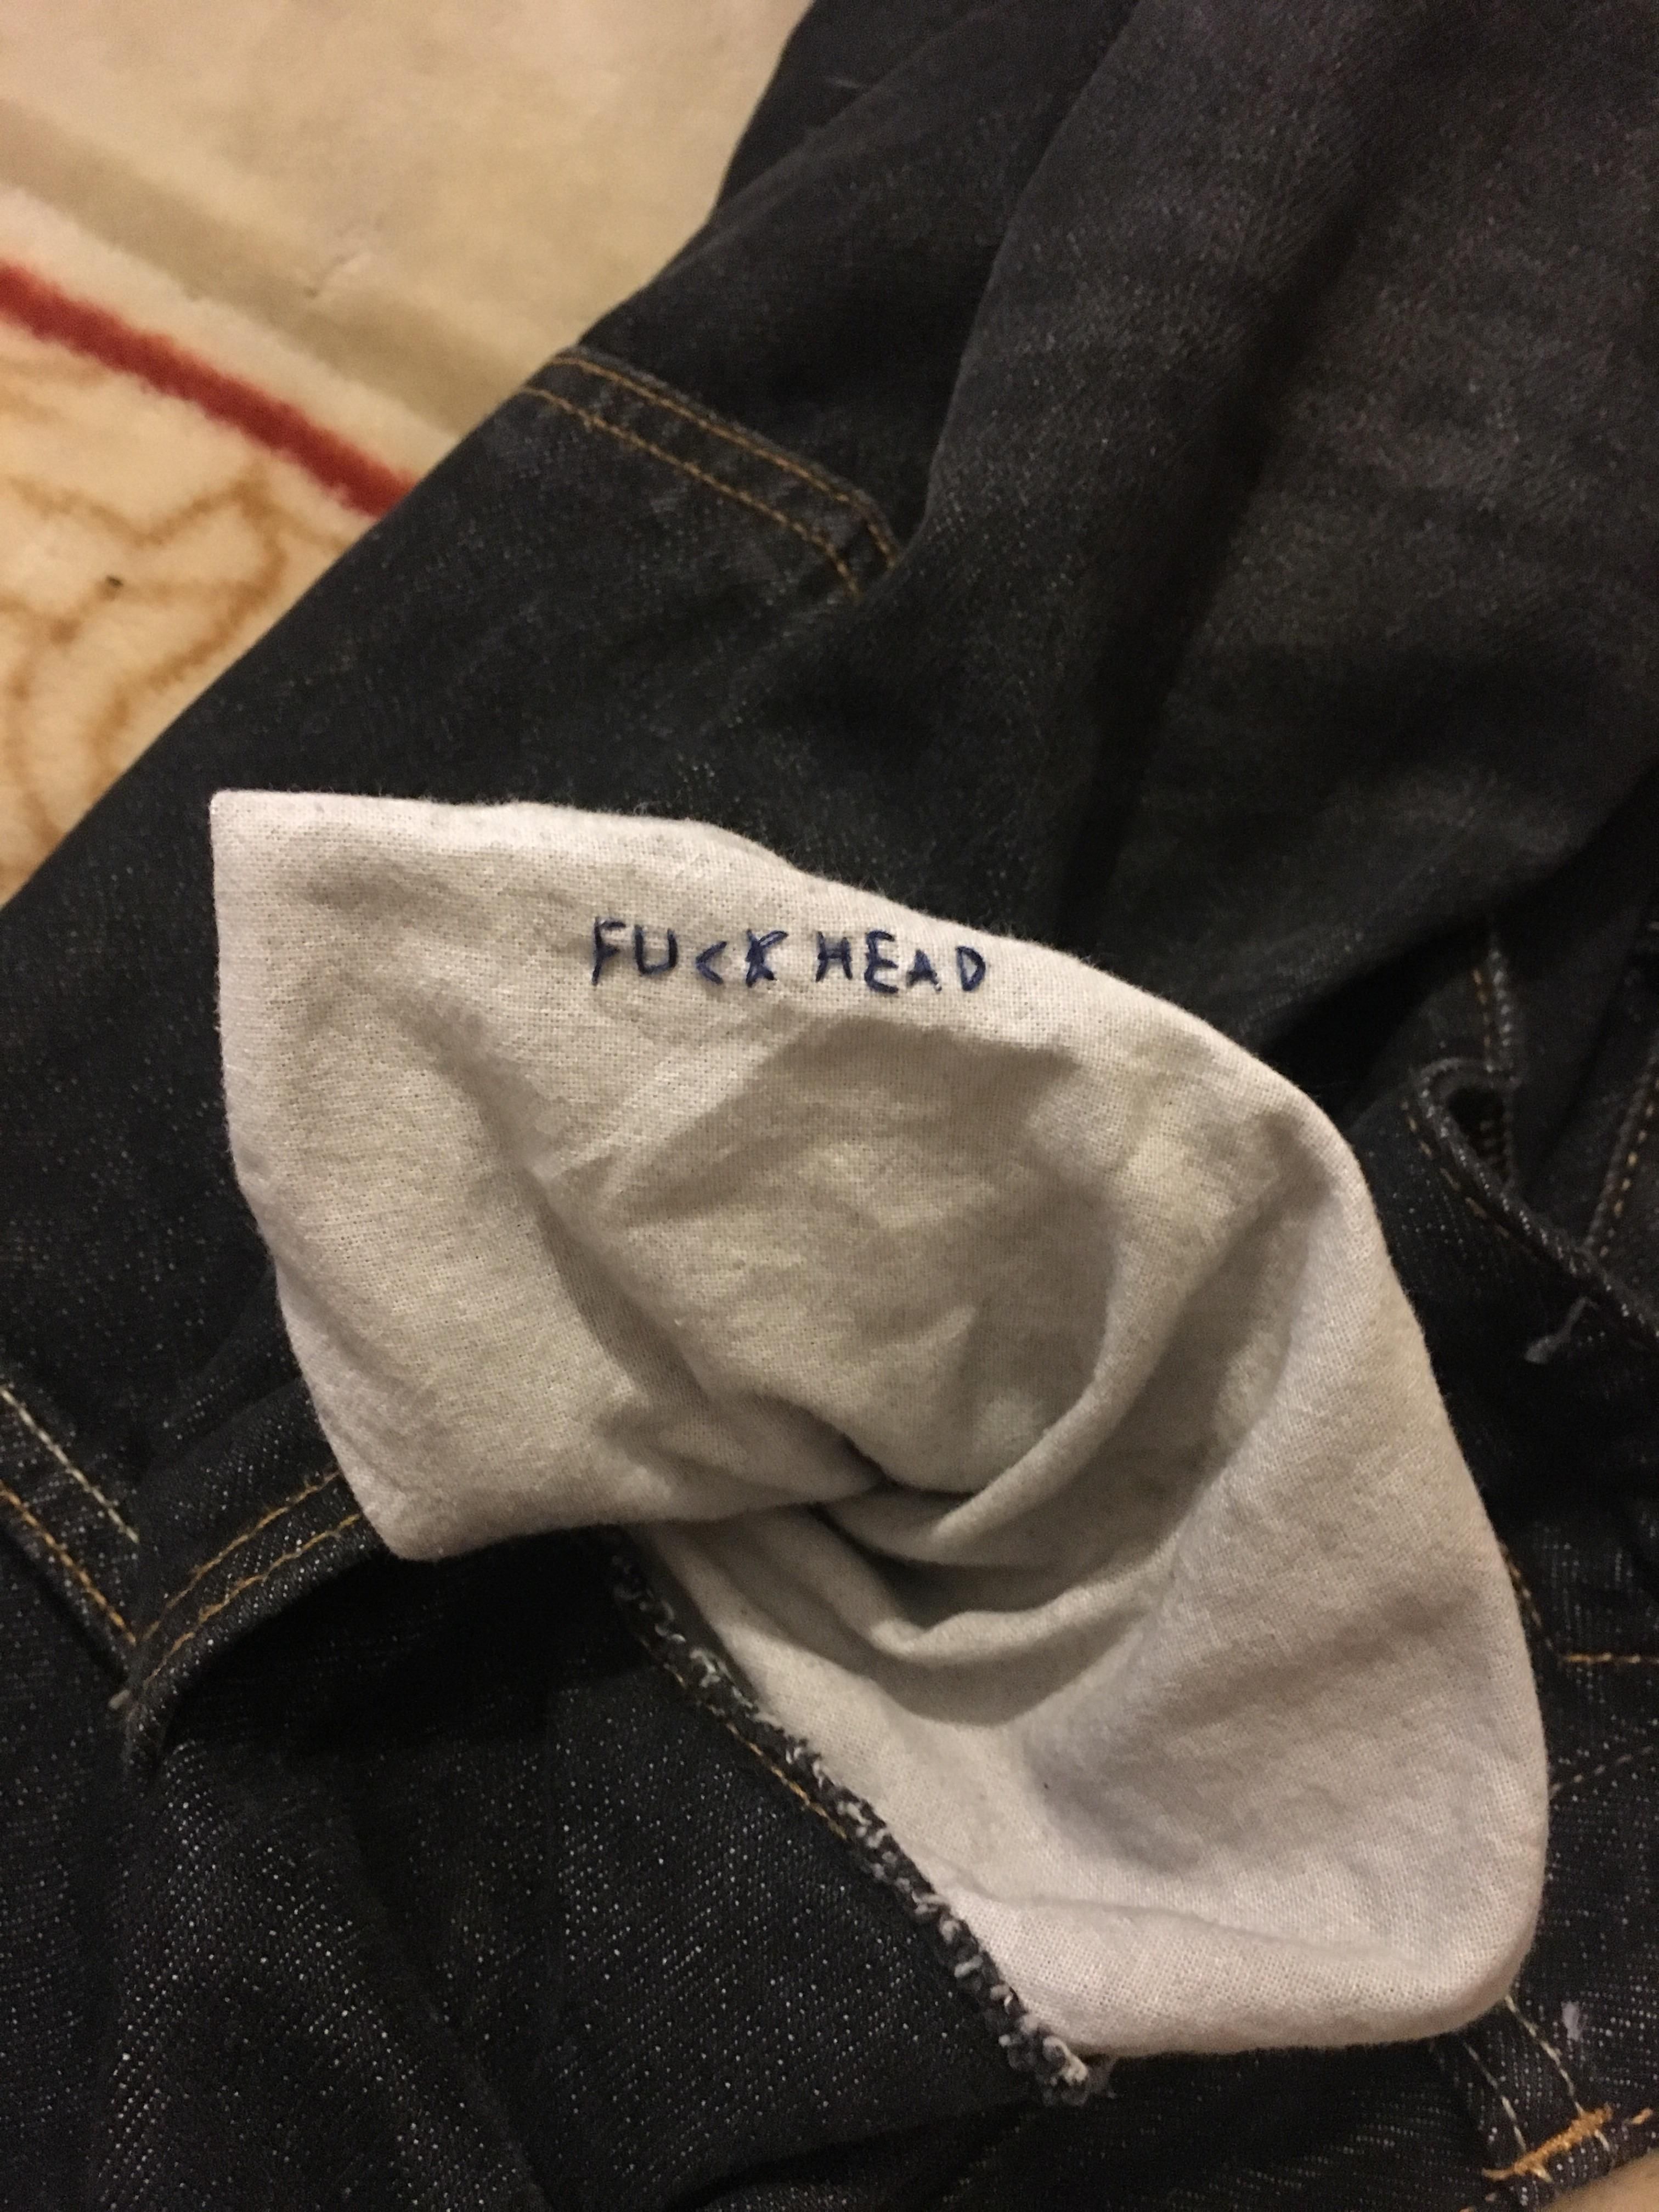 The other day my partner offered to sew up a hole in my pocket. This morning I checked it and found this stitched into it...